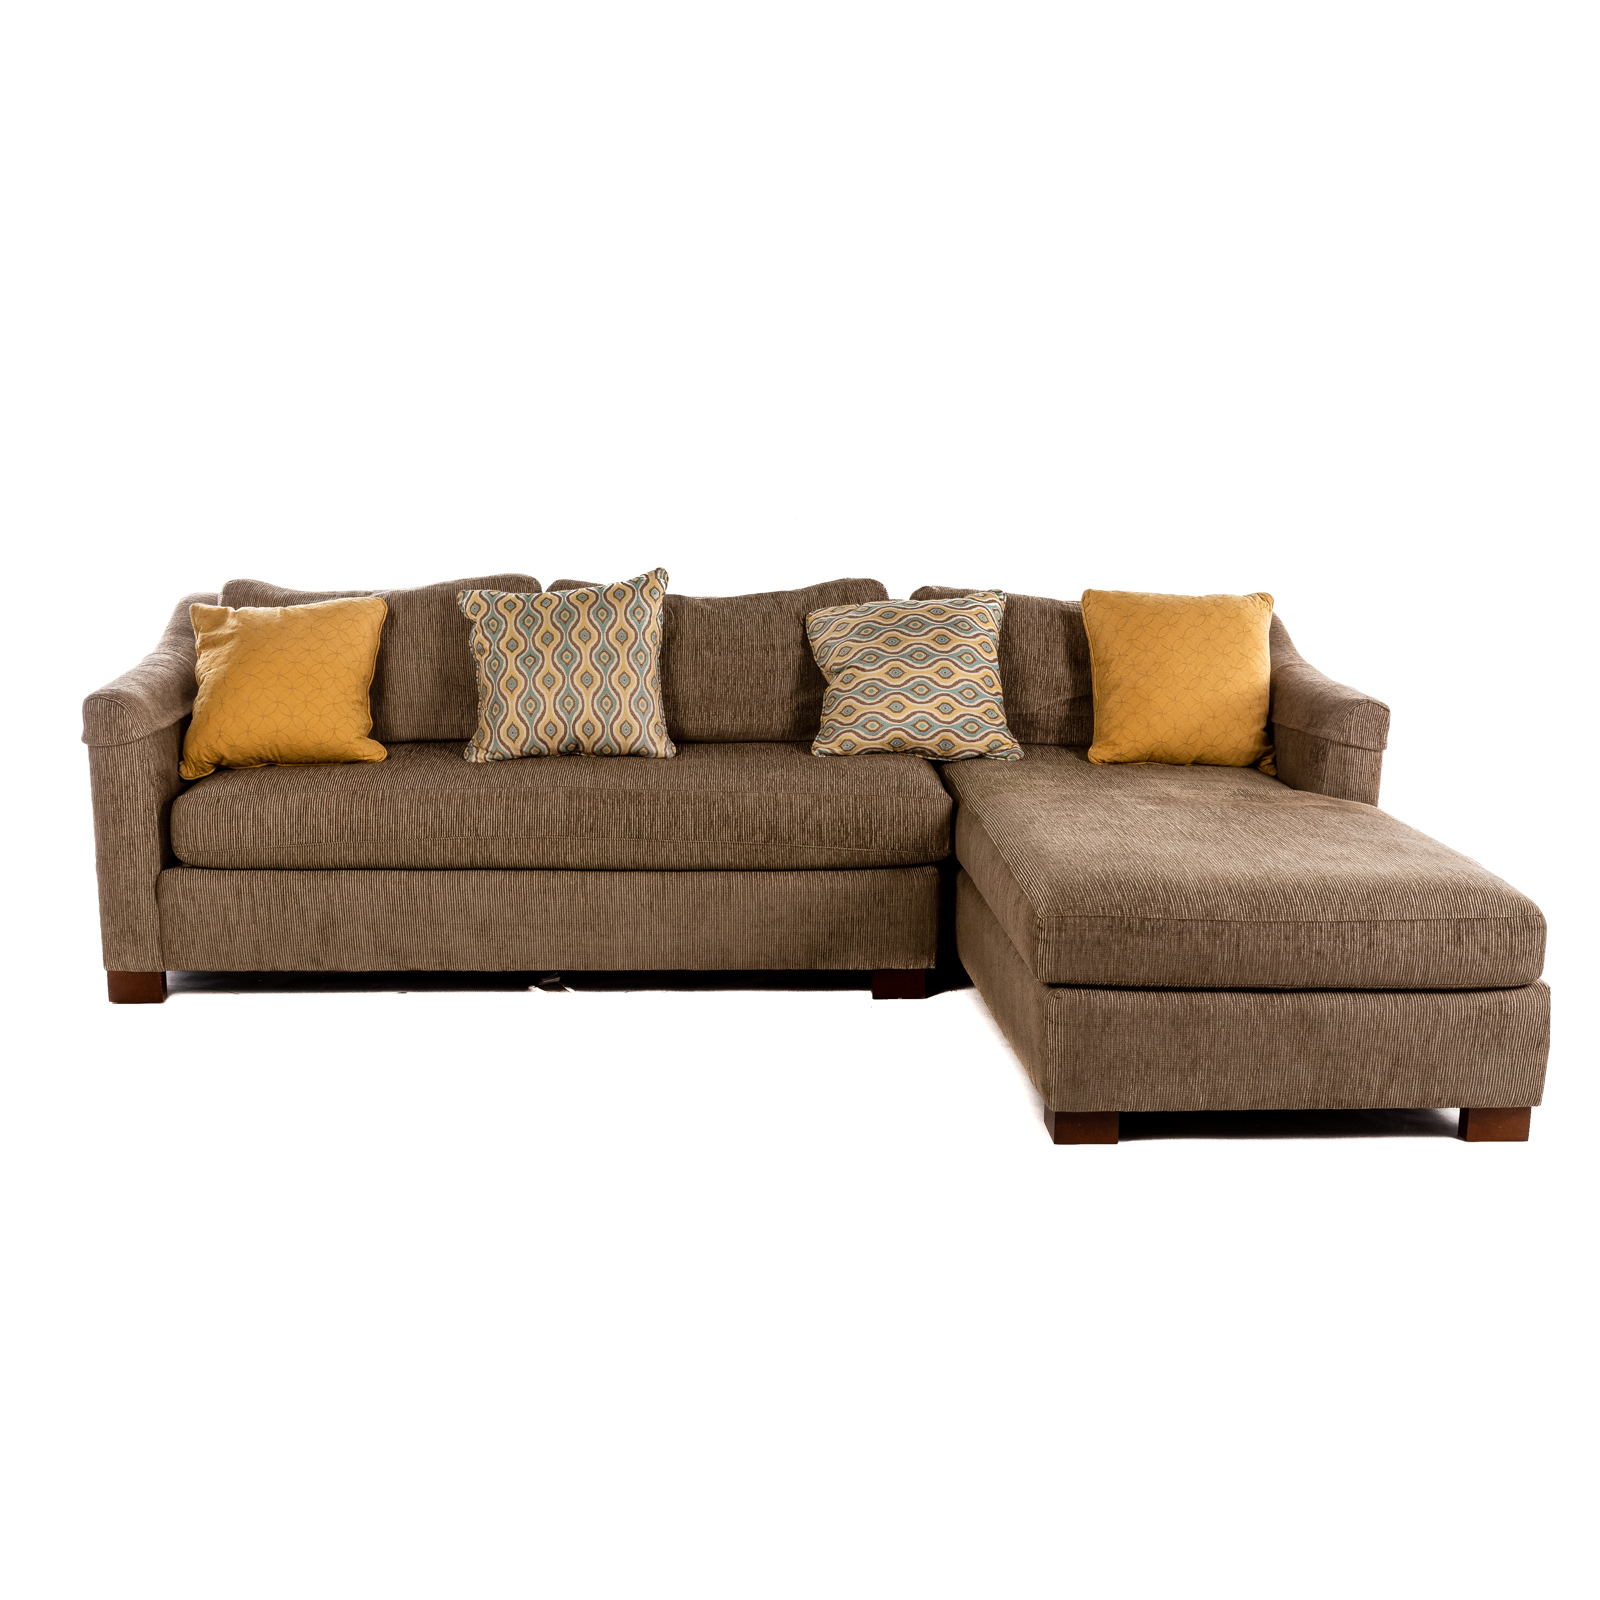 SHERILL UPHOLSTERED SOFA WITH CHAISE 288703